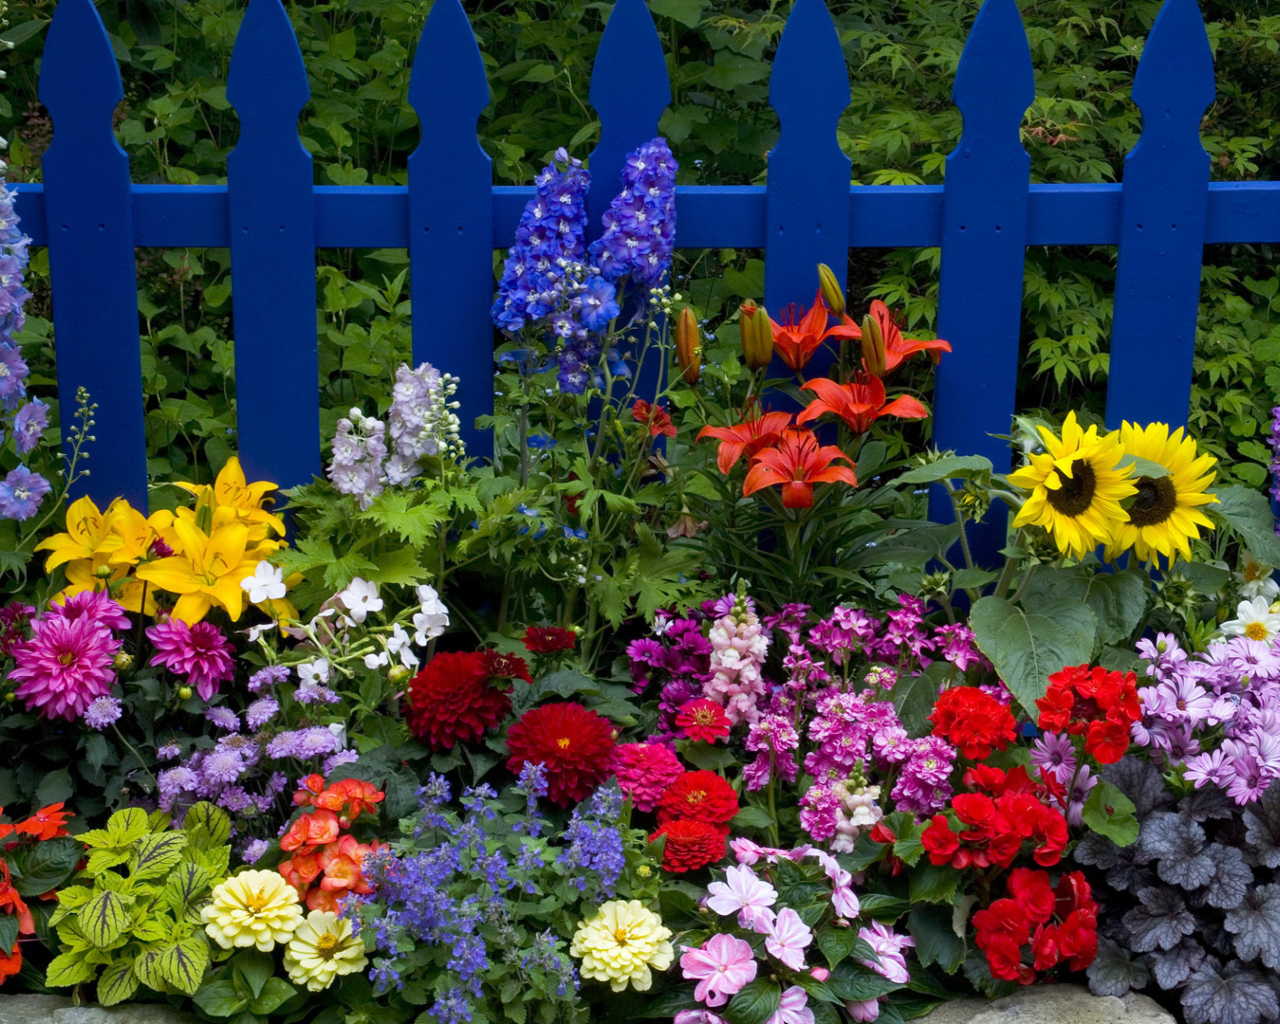 Garden Flowers In Front Of Bright Blue Fence wallpaper 1280x1024